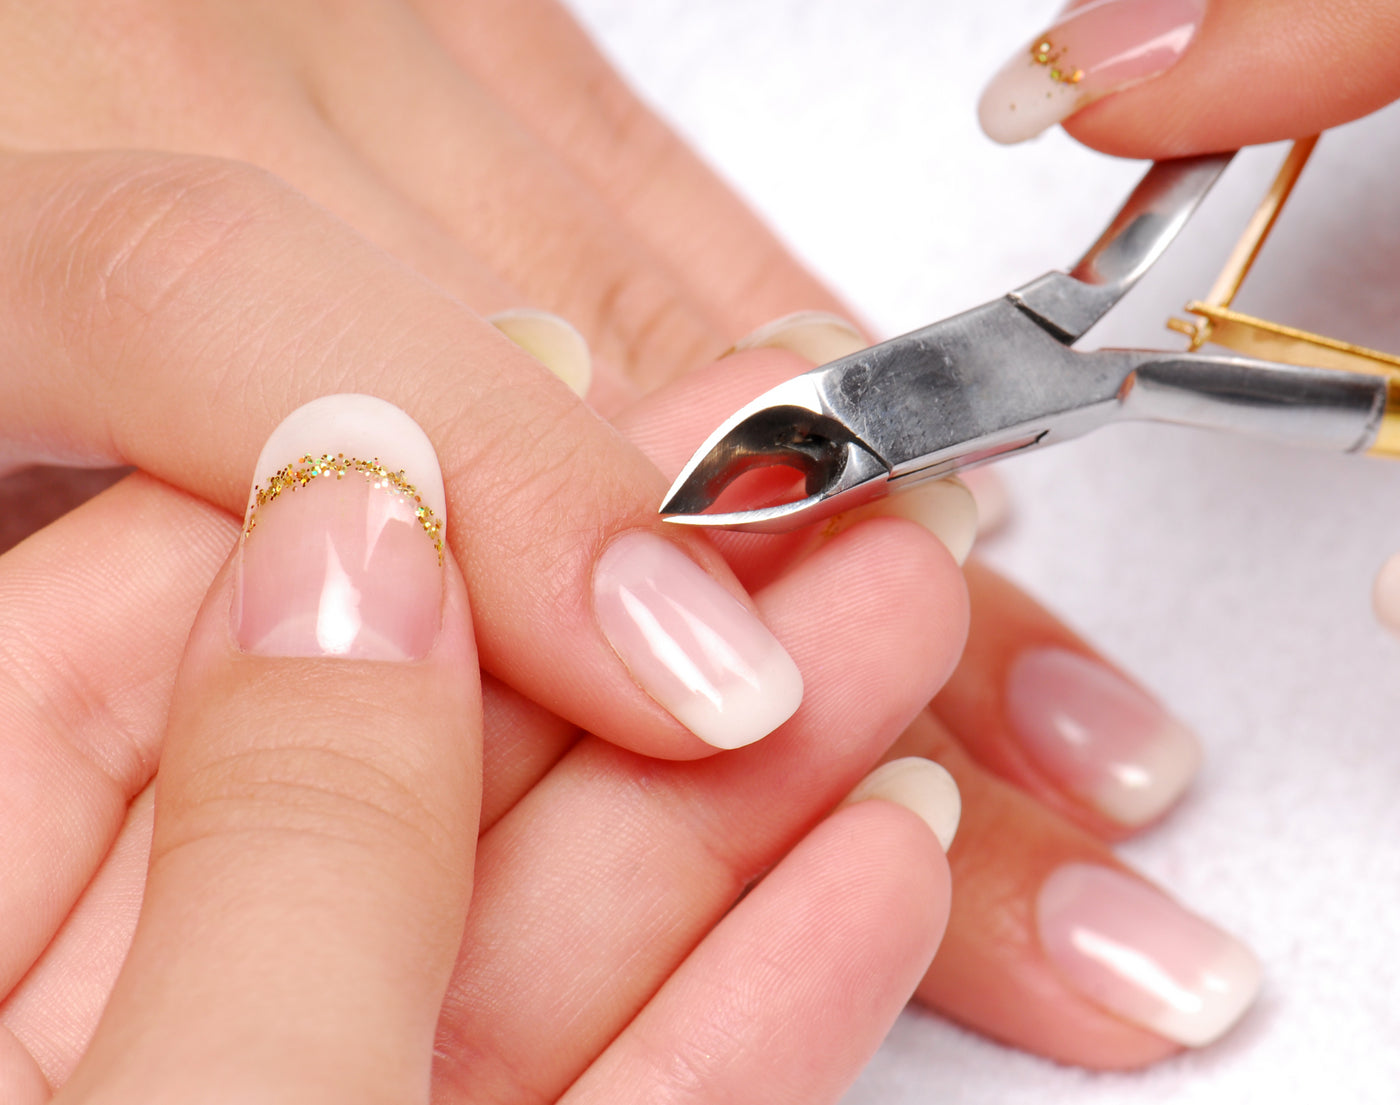 5 Facts About Cuticle Your Nail Tech Wants You To Know - The Nail Bar  Beauty & Co.